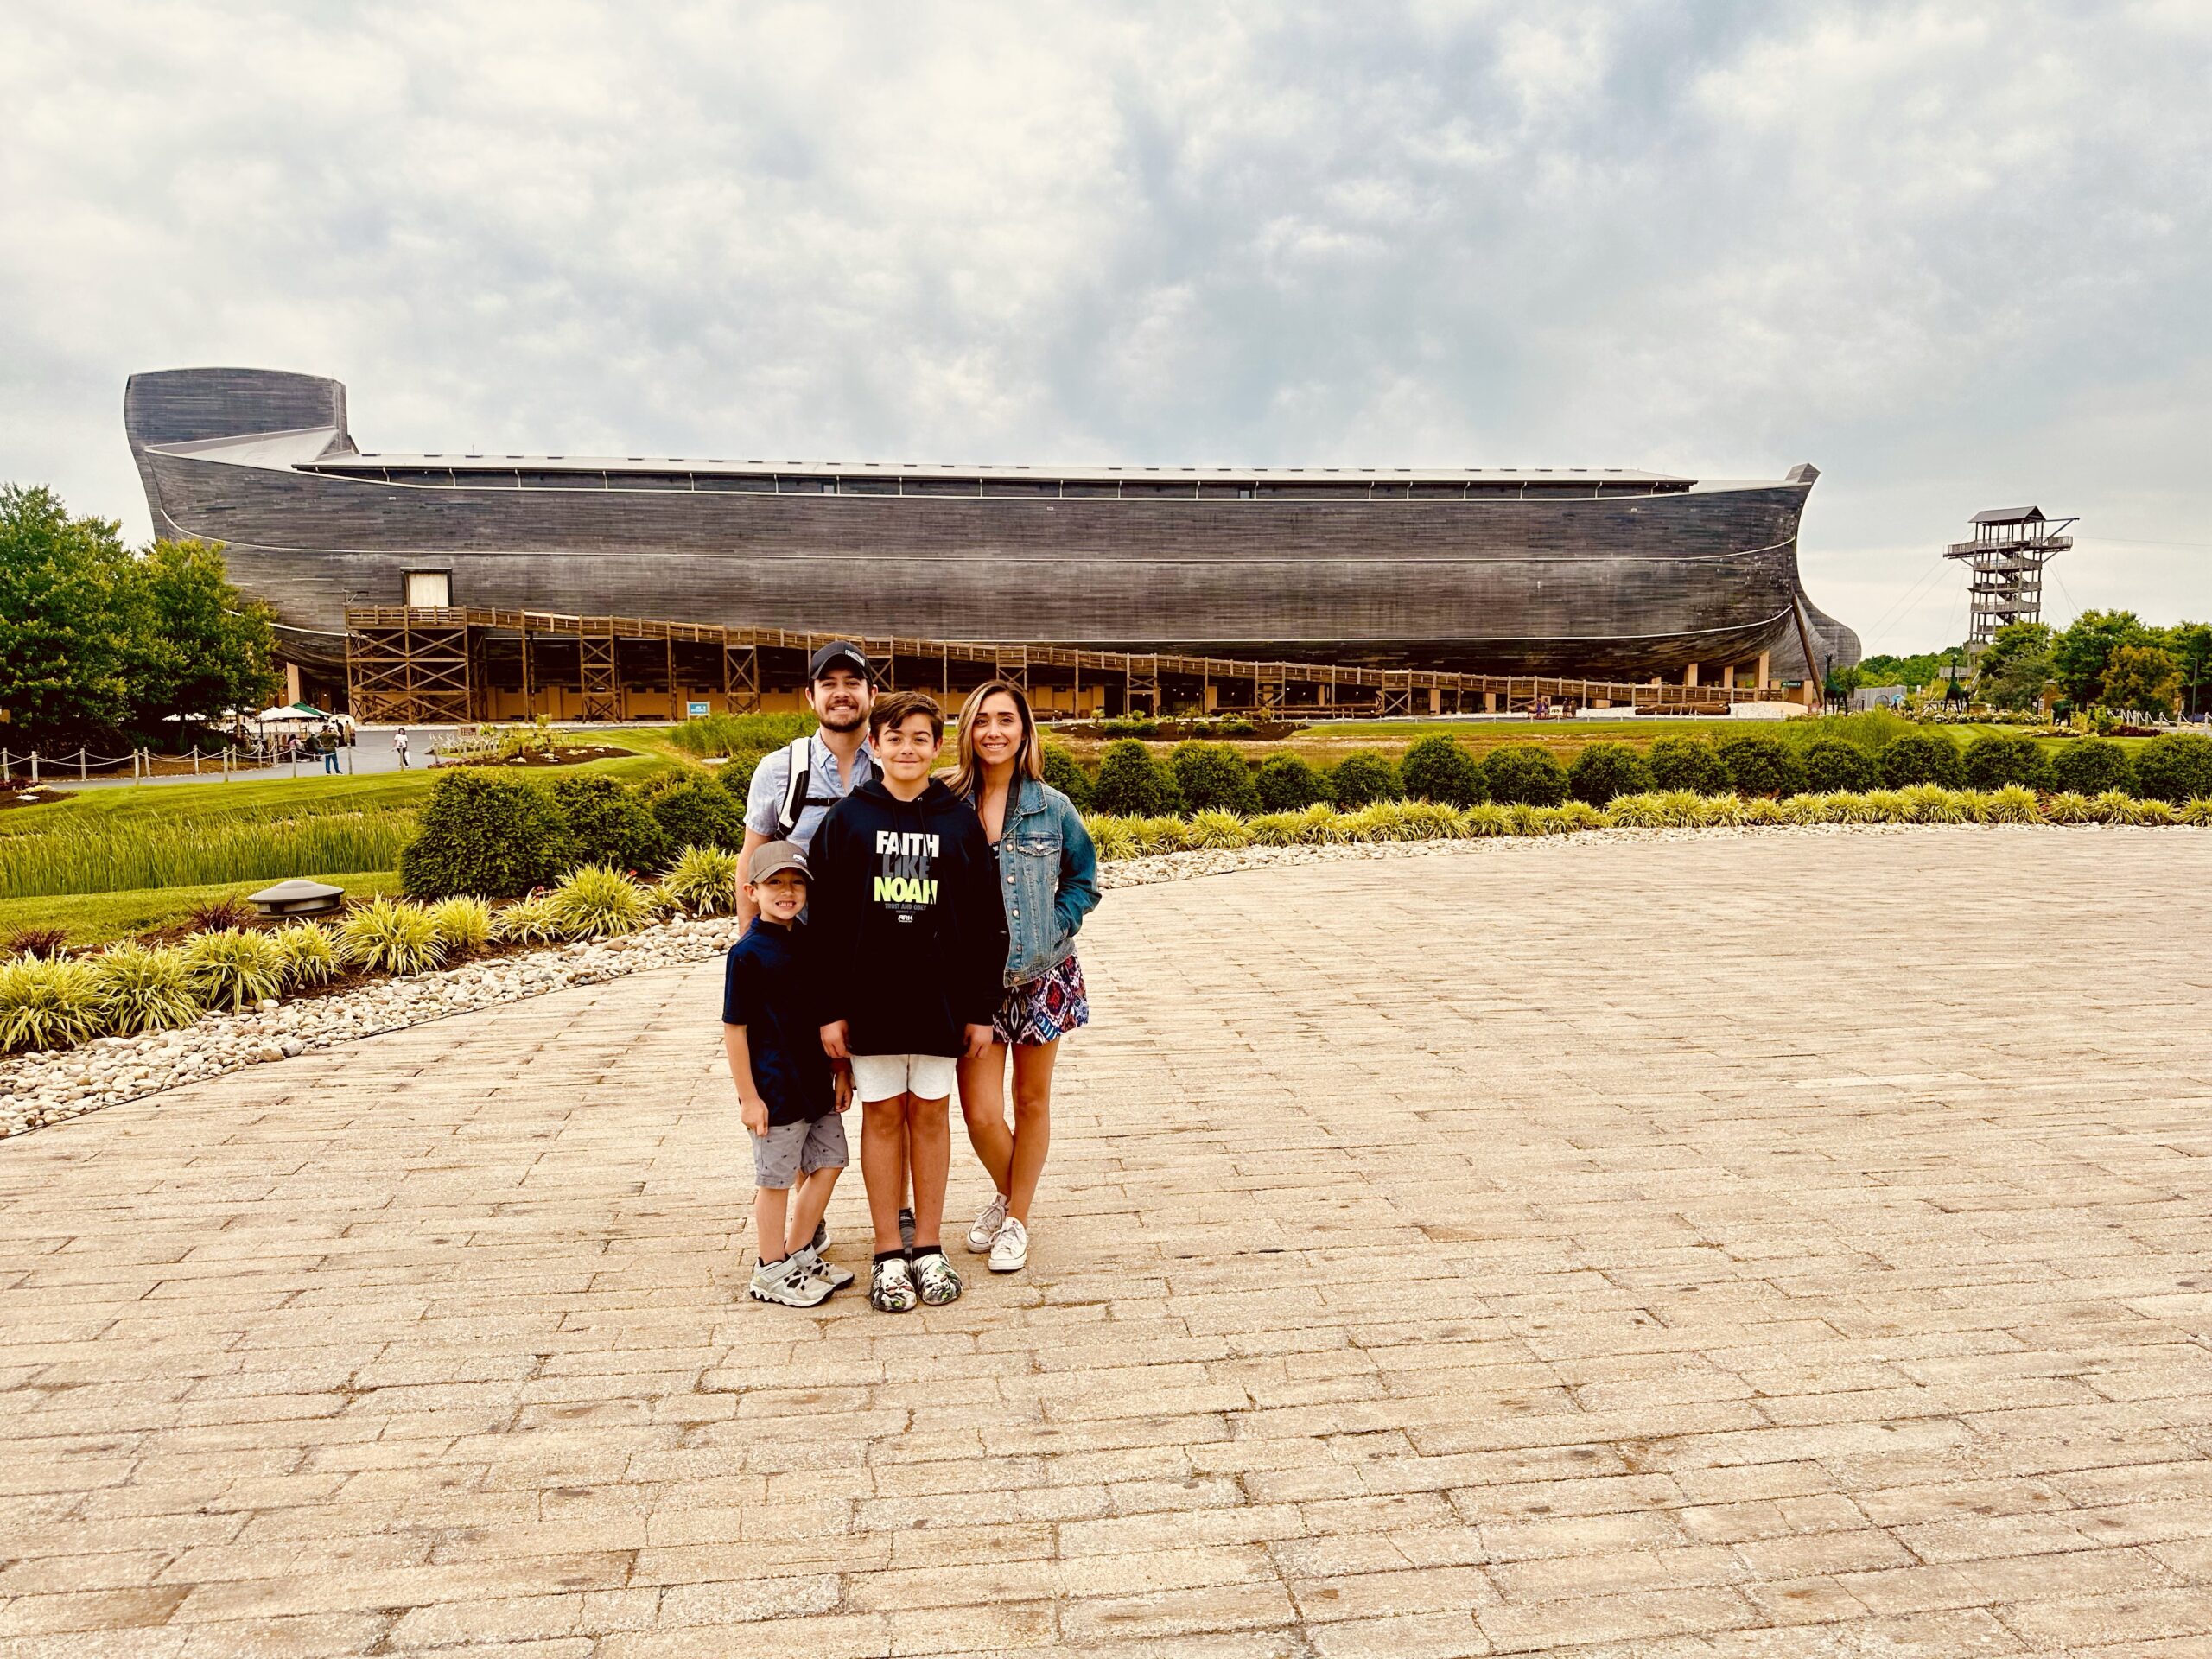 7 Tips for visiting the Ark Encounter